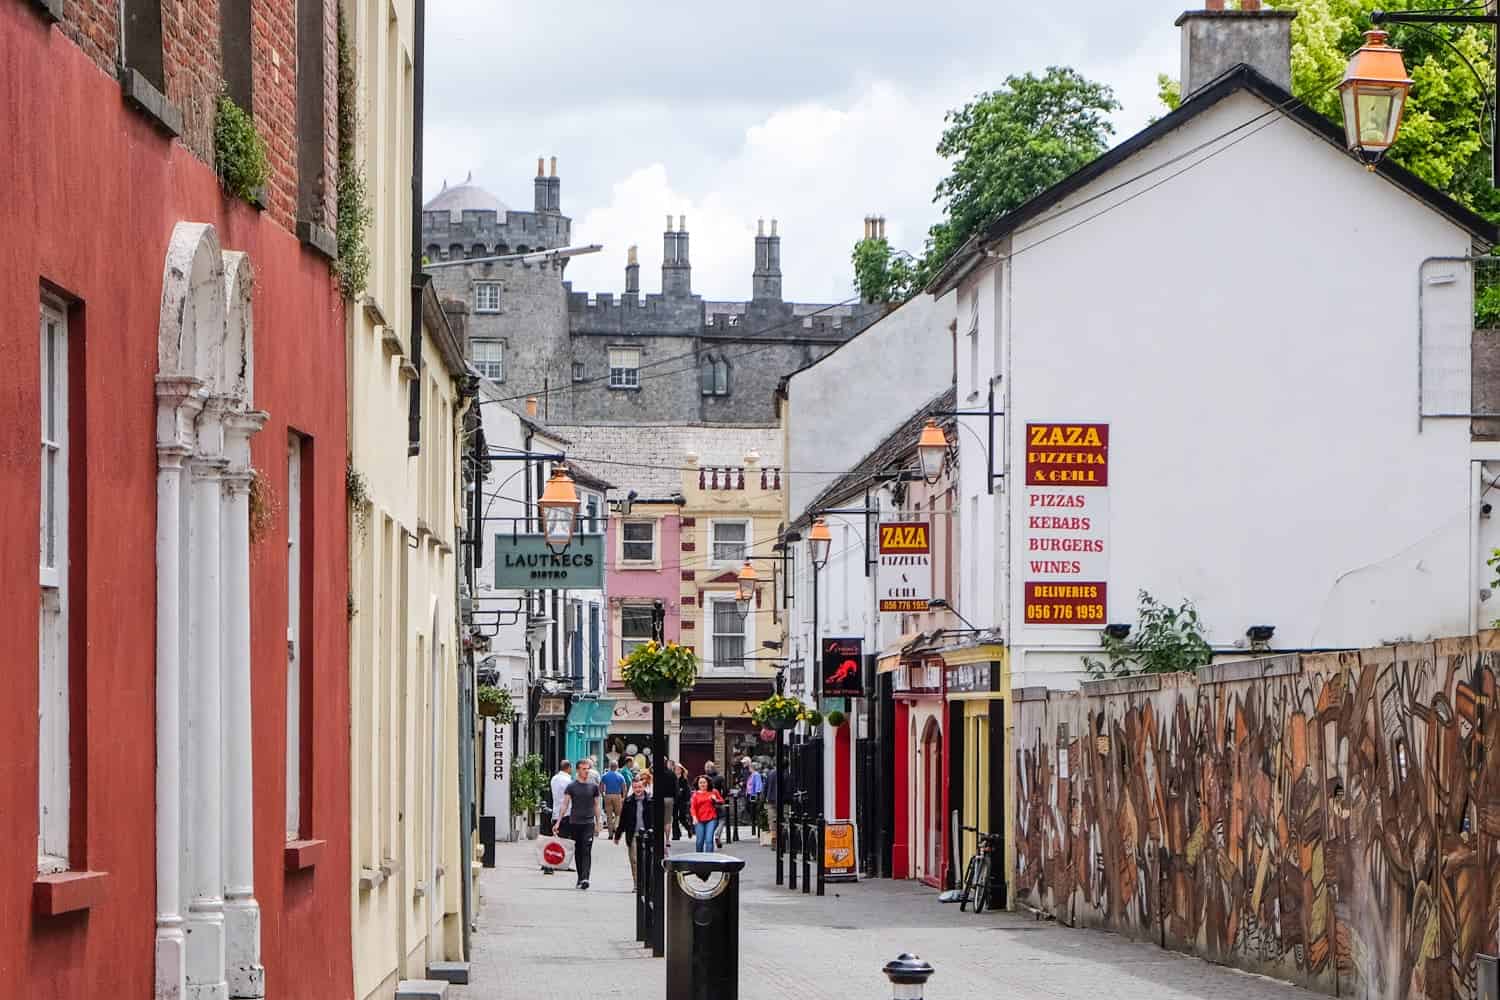 Walking tour in Kilkenny Medieval Mile in Ireland's Ancient East